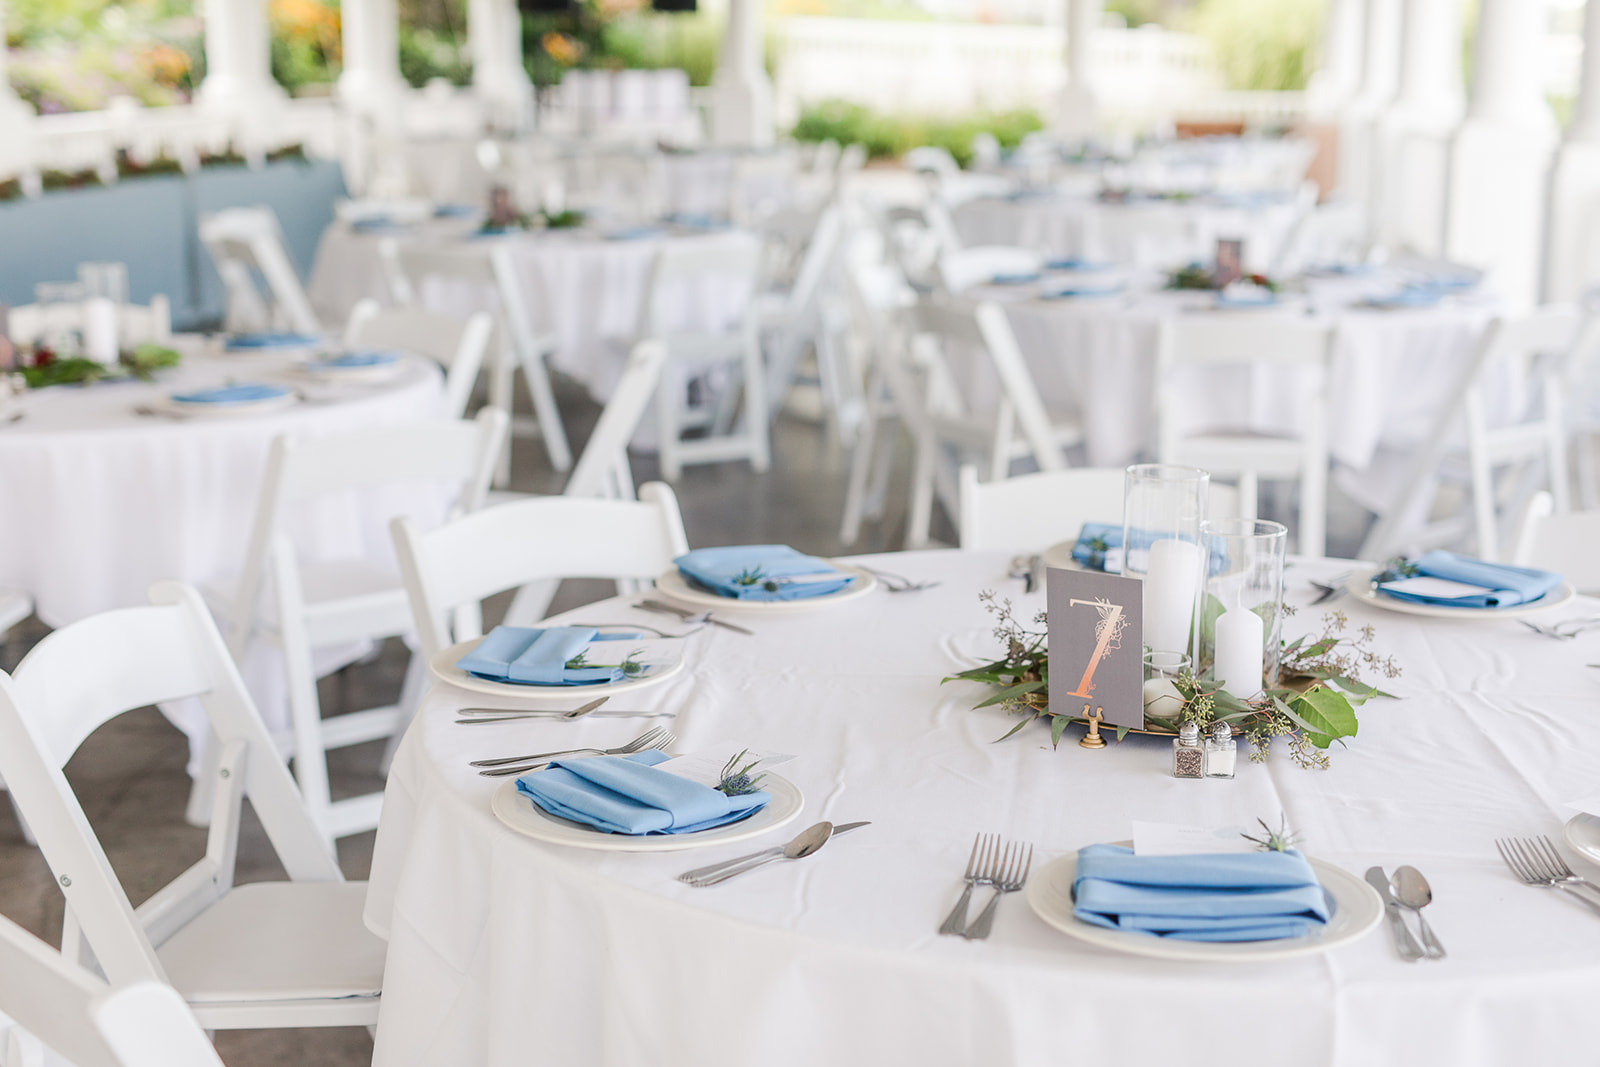 Tables set outside at a Bay Pointe Inn wedding in Shelbyville, Michigan